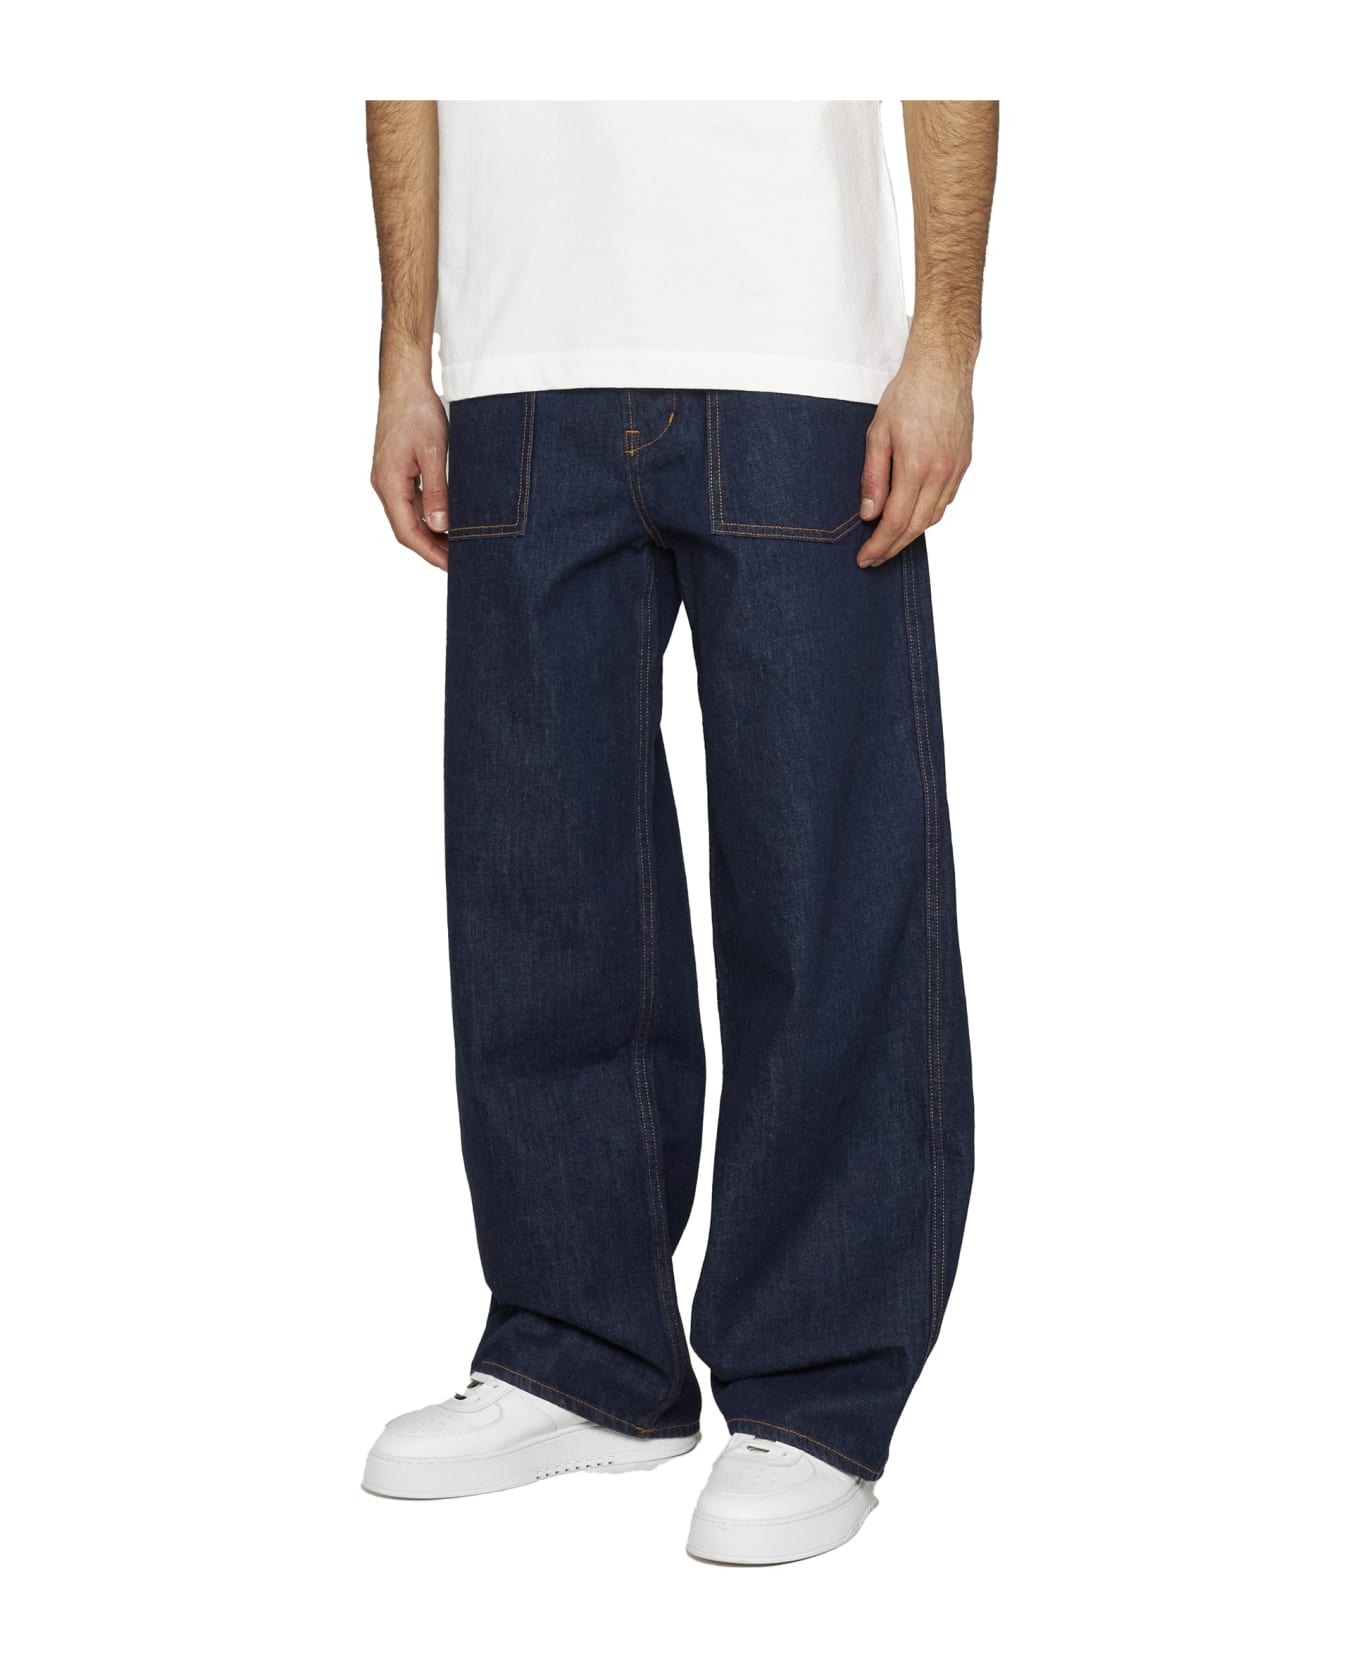 Kenzo Loose Fit Jeans - Rinse blue